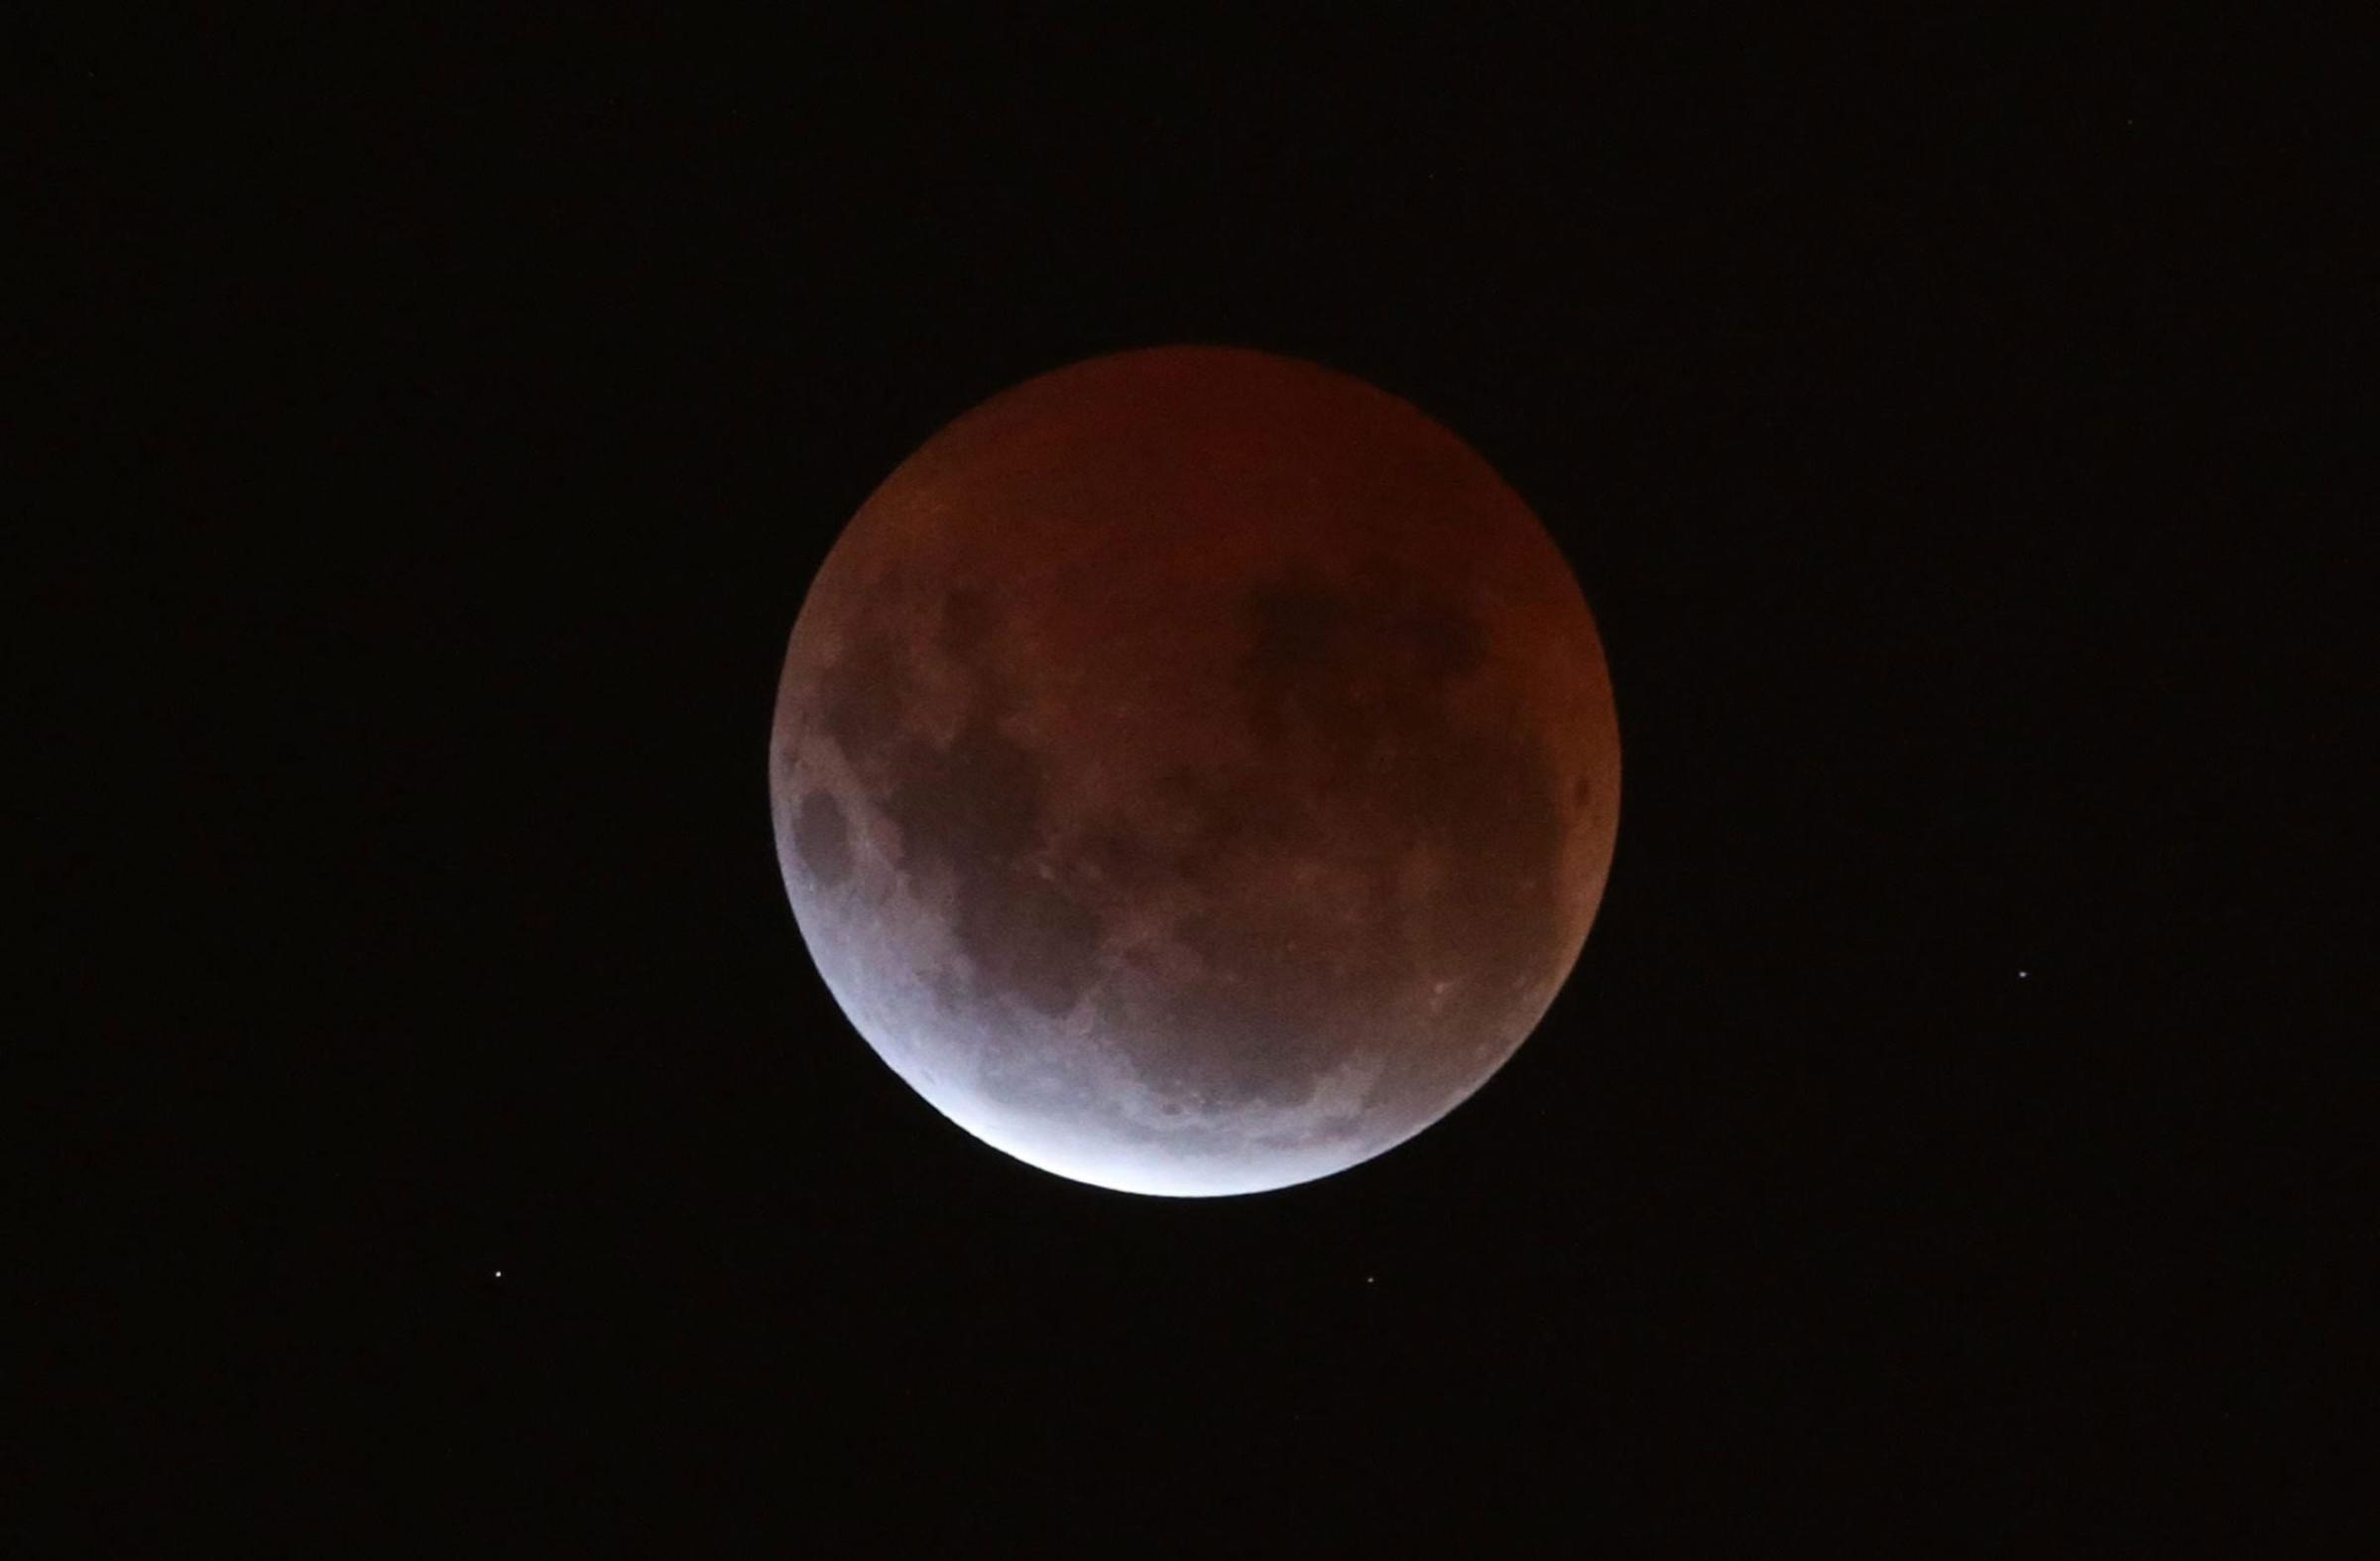 The lunar eclipse seen from Melbourne, Australia on April 4, 2015.